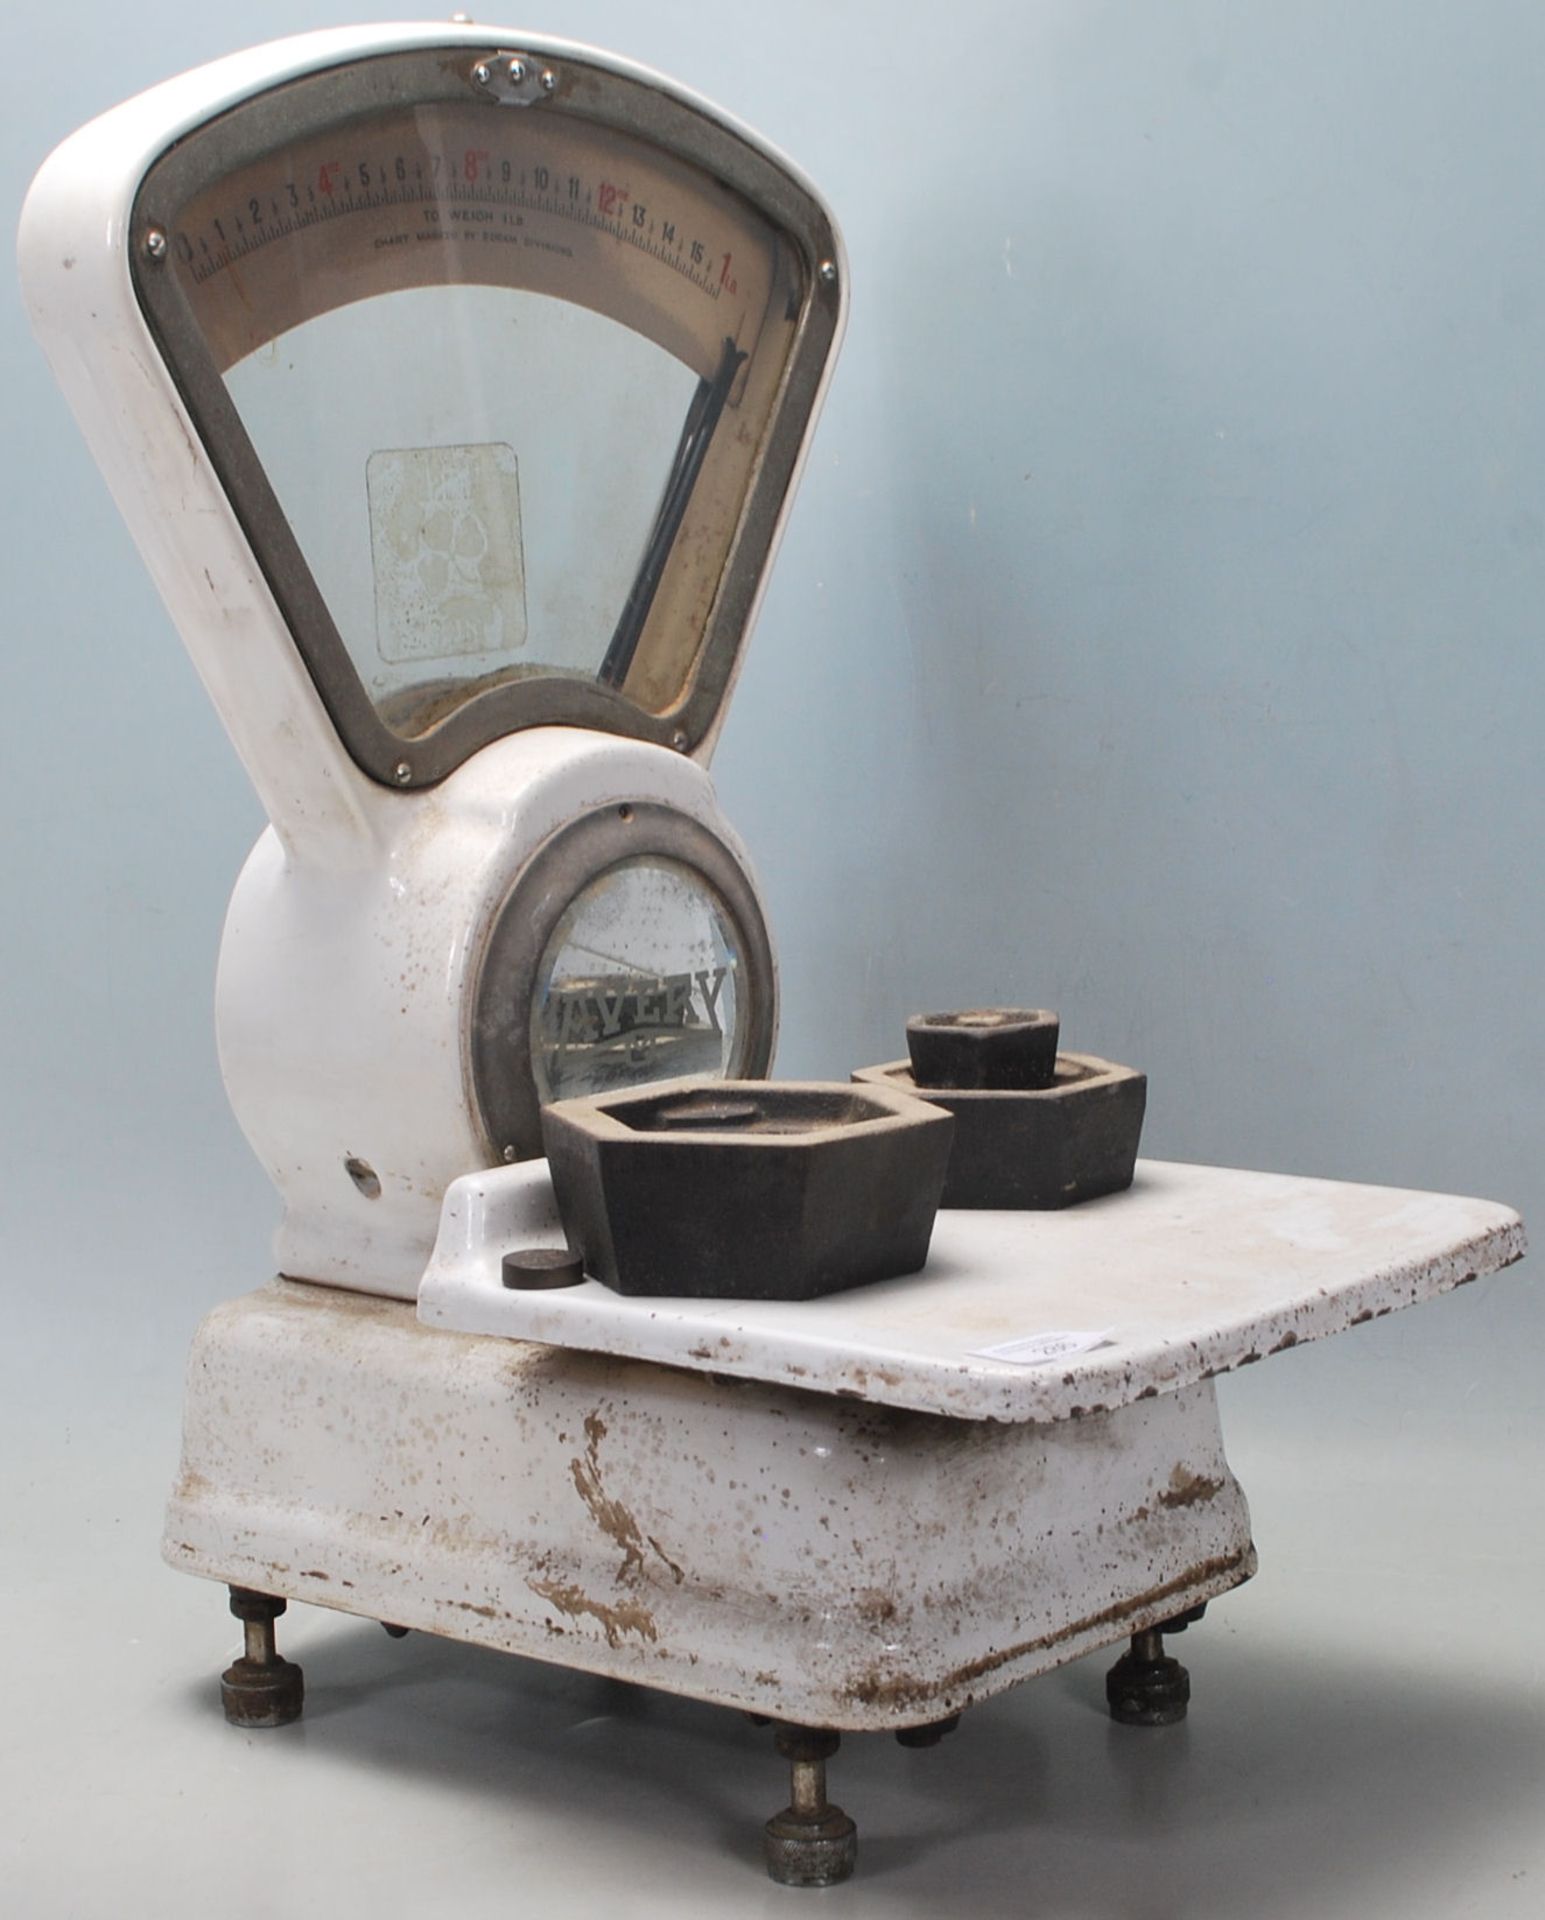 A VINTAGE MID 20TH CENTURY AVERY SHOP SCALE.